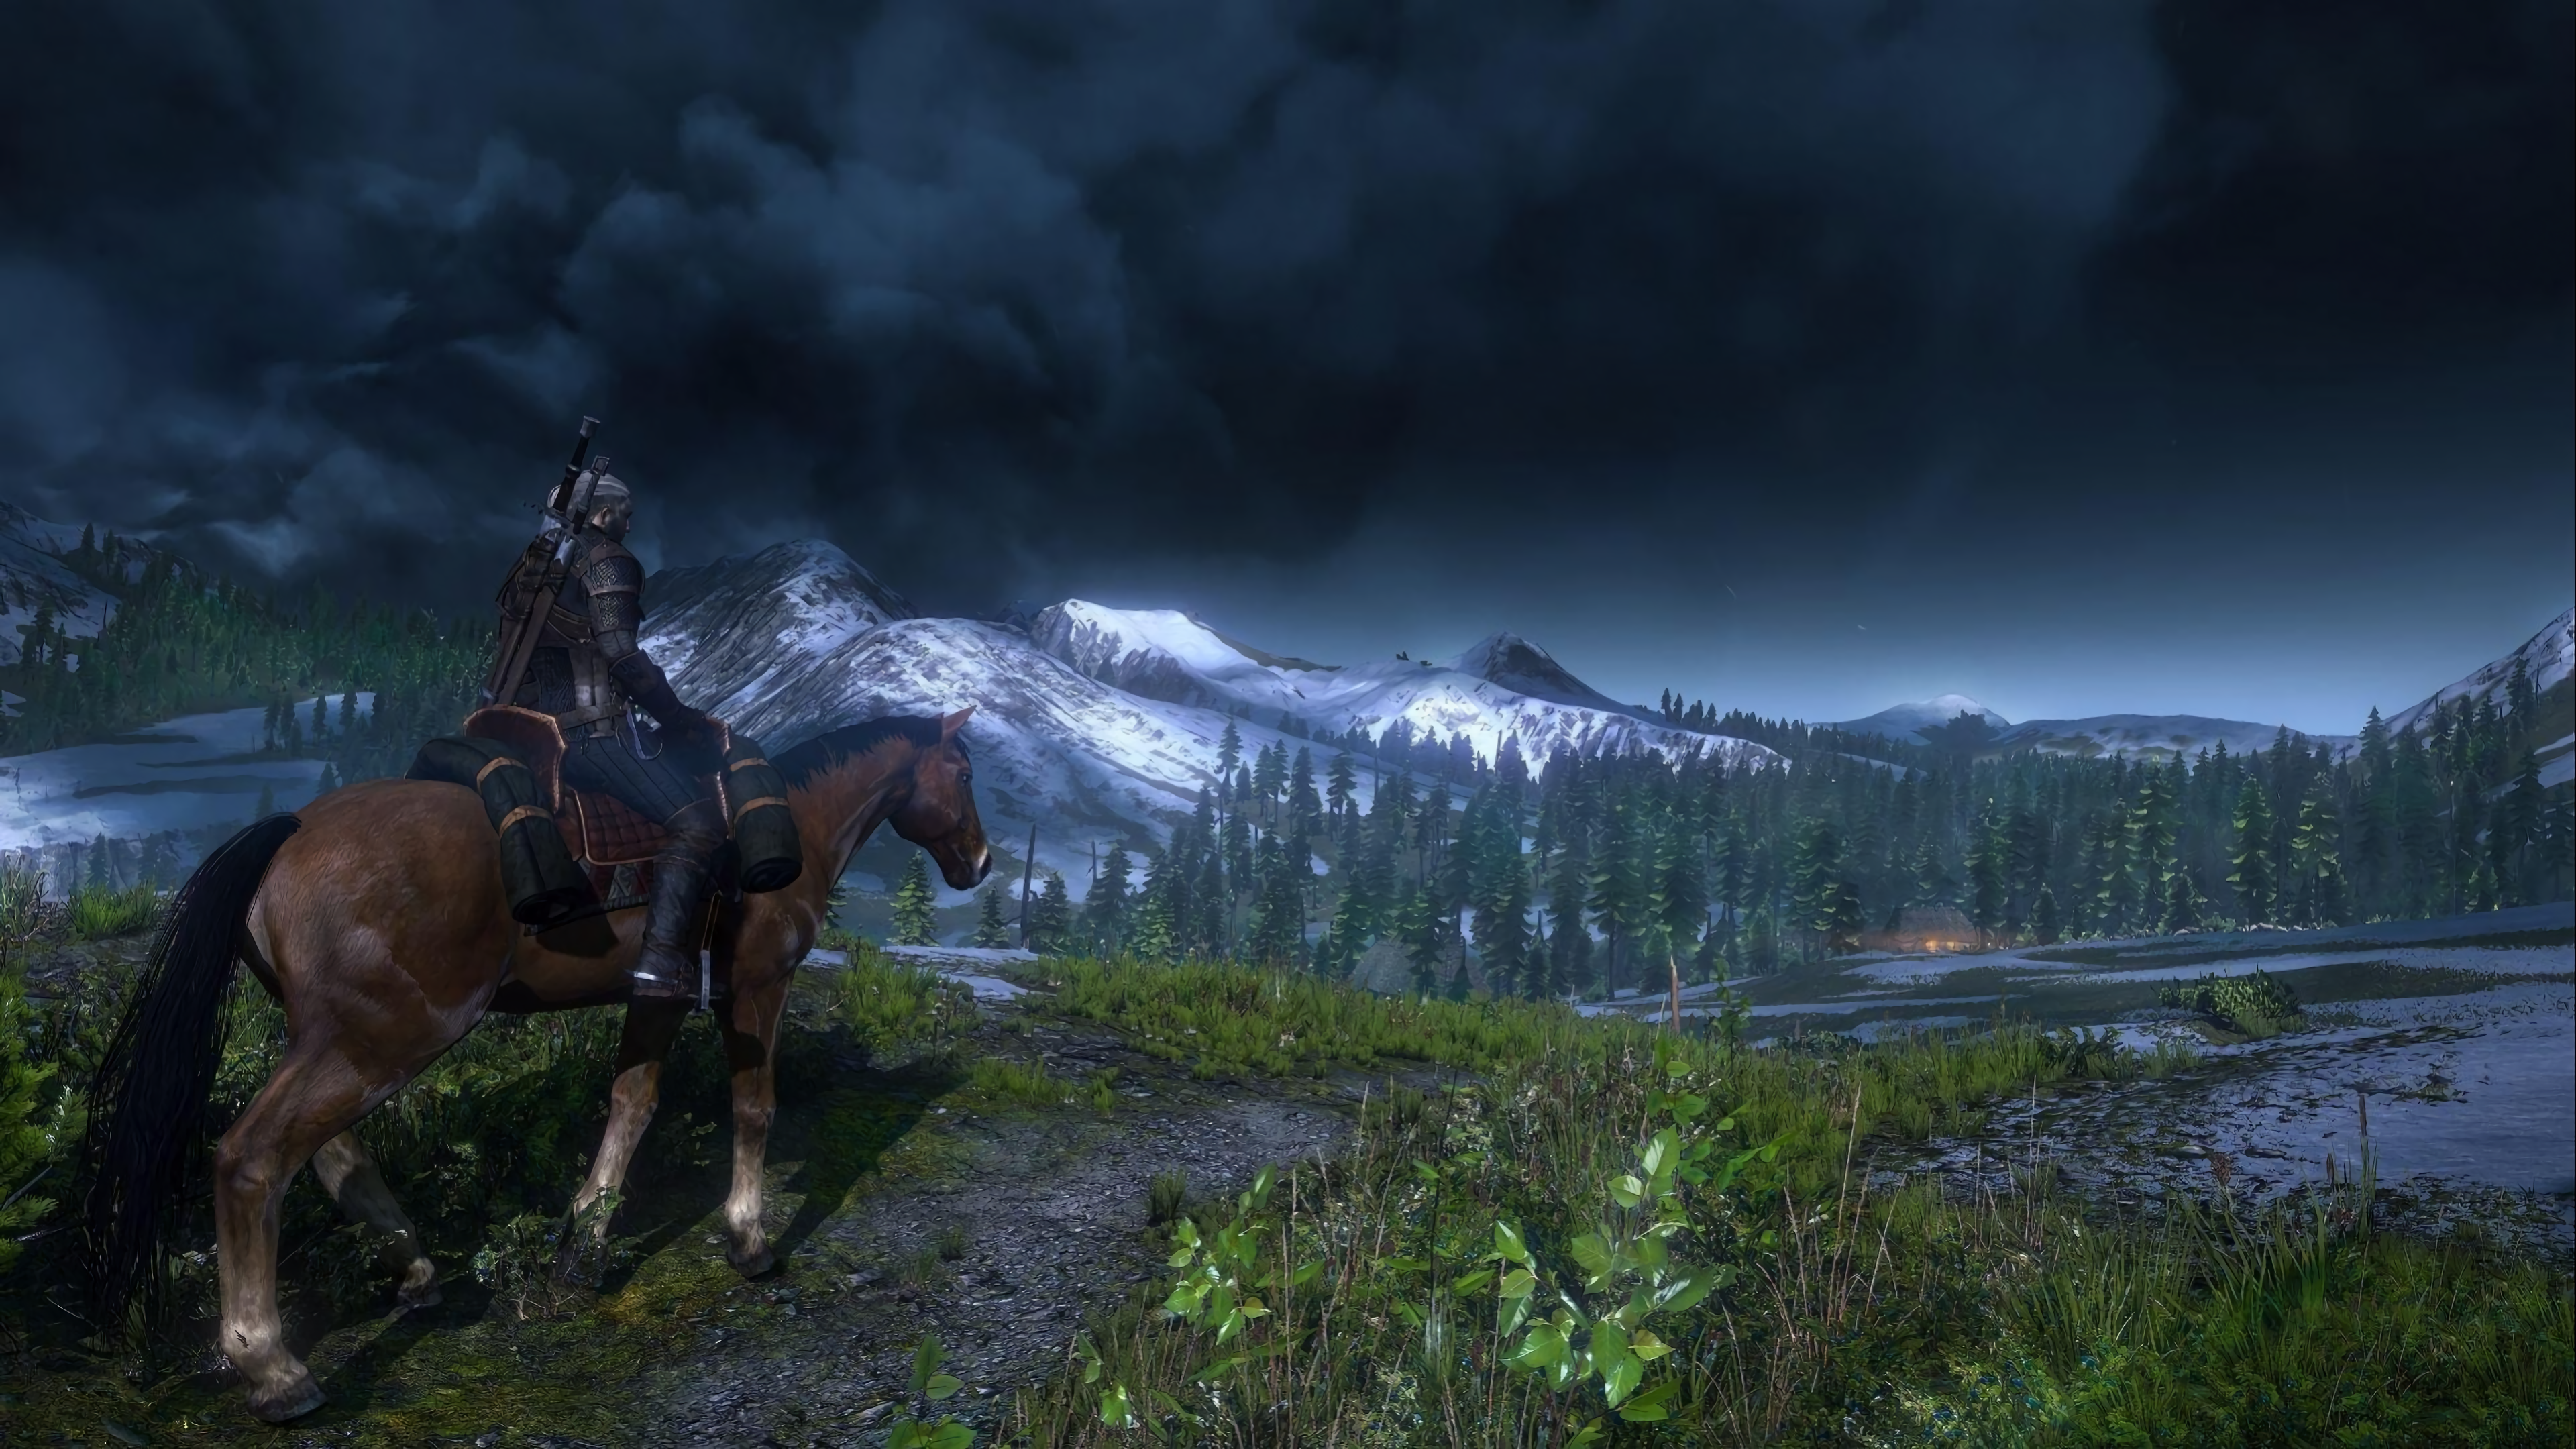 General 3840x2160 The Witcher 3: Wild Hunt video games clouds dark sky screen shot RPG PC gaming video game landscape